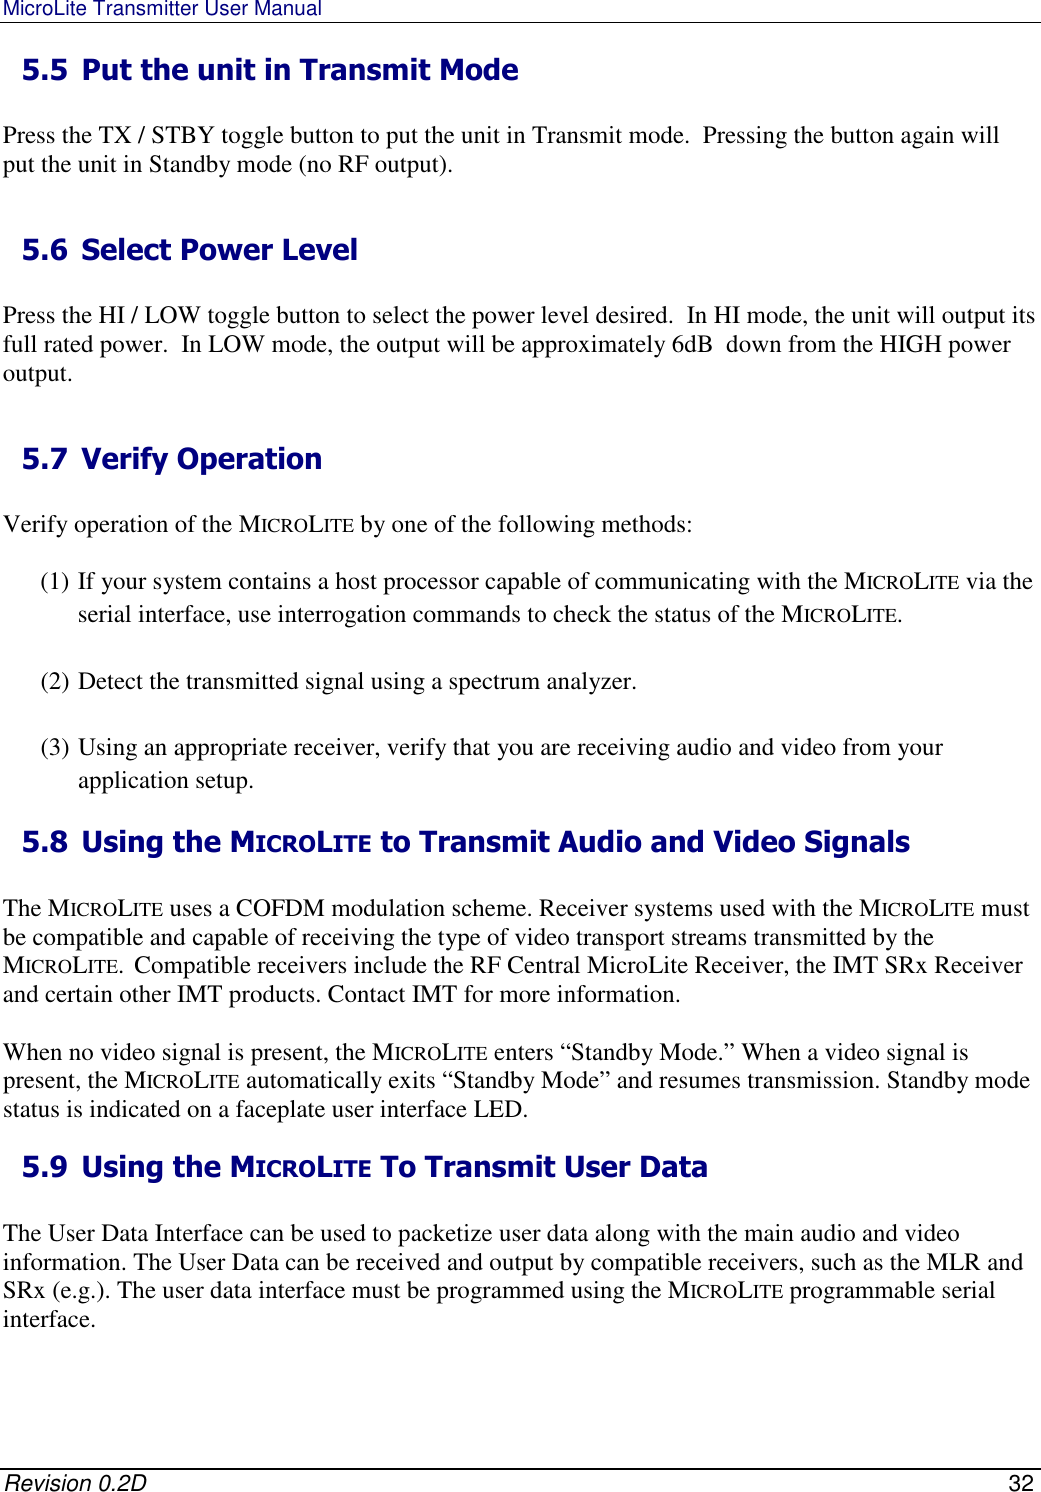 MicroLite Transmitter User Manual   Revision 0.2D    32 5.5 Put the unit in Transmit Mode   Press the TX / STBY toggle button to put the unit in Transmit mode.  Pressing the button again will put the unit in Standby mode (no RF output).   5.6 Select Power Level   Press the HI / LOW toggle button to select the power level desired.  In HI mode, the unit will output its full rated power.  In LOW mode, the output will be approximately 6dB  down from the HIGH power output.   5.7 Verify Operation   Verify operation of the MICROLITE by one of the following methods:  (1) If your system contains a host processor capable of communicating with the MICROLITE via the serial interface, use interrogation commands to check the status of the MICROLITE.   (2) Detect the transmitted signal using a spectrum analyzer.  (3) Using an appropriate receiver, verify that you are receiving audio and video from your application setup.  5.8 Using the MICROLITE to Transmit Audio and Video Signals  The MICROLITE uses a COFDM modulation scheme. Receiver systems used with the MICROLITE must be compatible and capable of receiving the type of video transport streams transmitted by the MICROLITE.  Compatible receivers include the RF Central MicroLite Receiver, the IMT SRx Receiver and certain other IMT products. Contact IMT for more information.   When no video signal is present, the MICROLITE enters “Standby Mode.” When a video signal is present, the MICROLITE automatically exits “Standby Mode” and resumes transmission. Standby mode status is indicated on a faceplate user interface LED.  5.9 Using the MICROLITE To Transmit User Data  The User Data Interface can be used to packetize user data along with the main audio and video information. The User Data can be received and output by compatible receivers, such as the MLR and SRx (e.g.). The user data interface must be programmed using the MICROLITE programmable serial interface.  